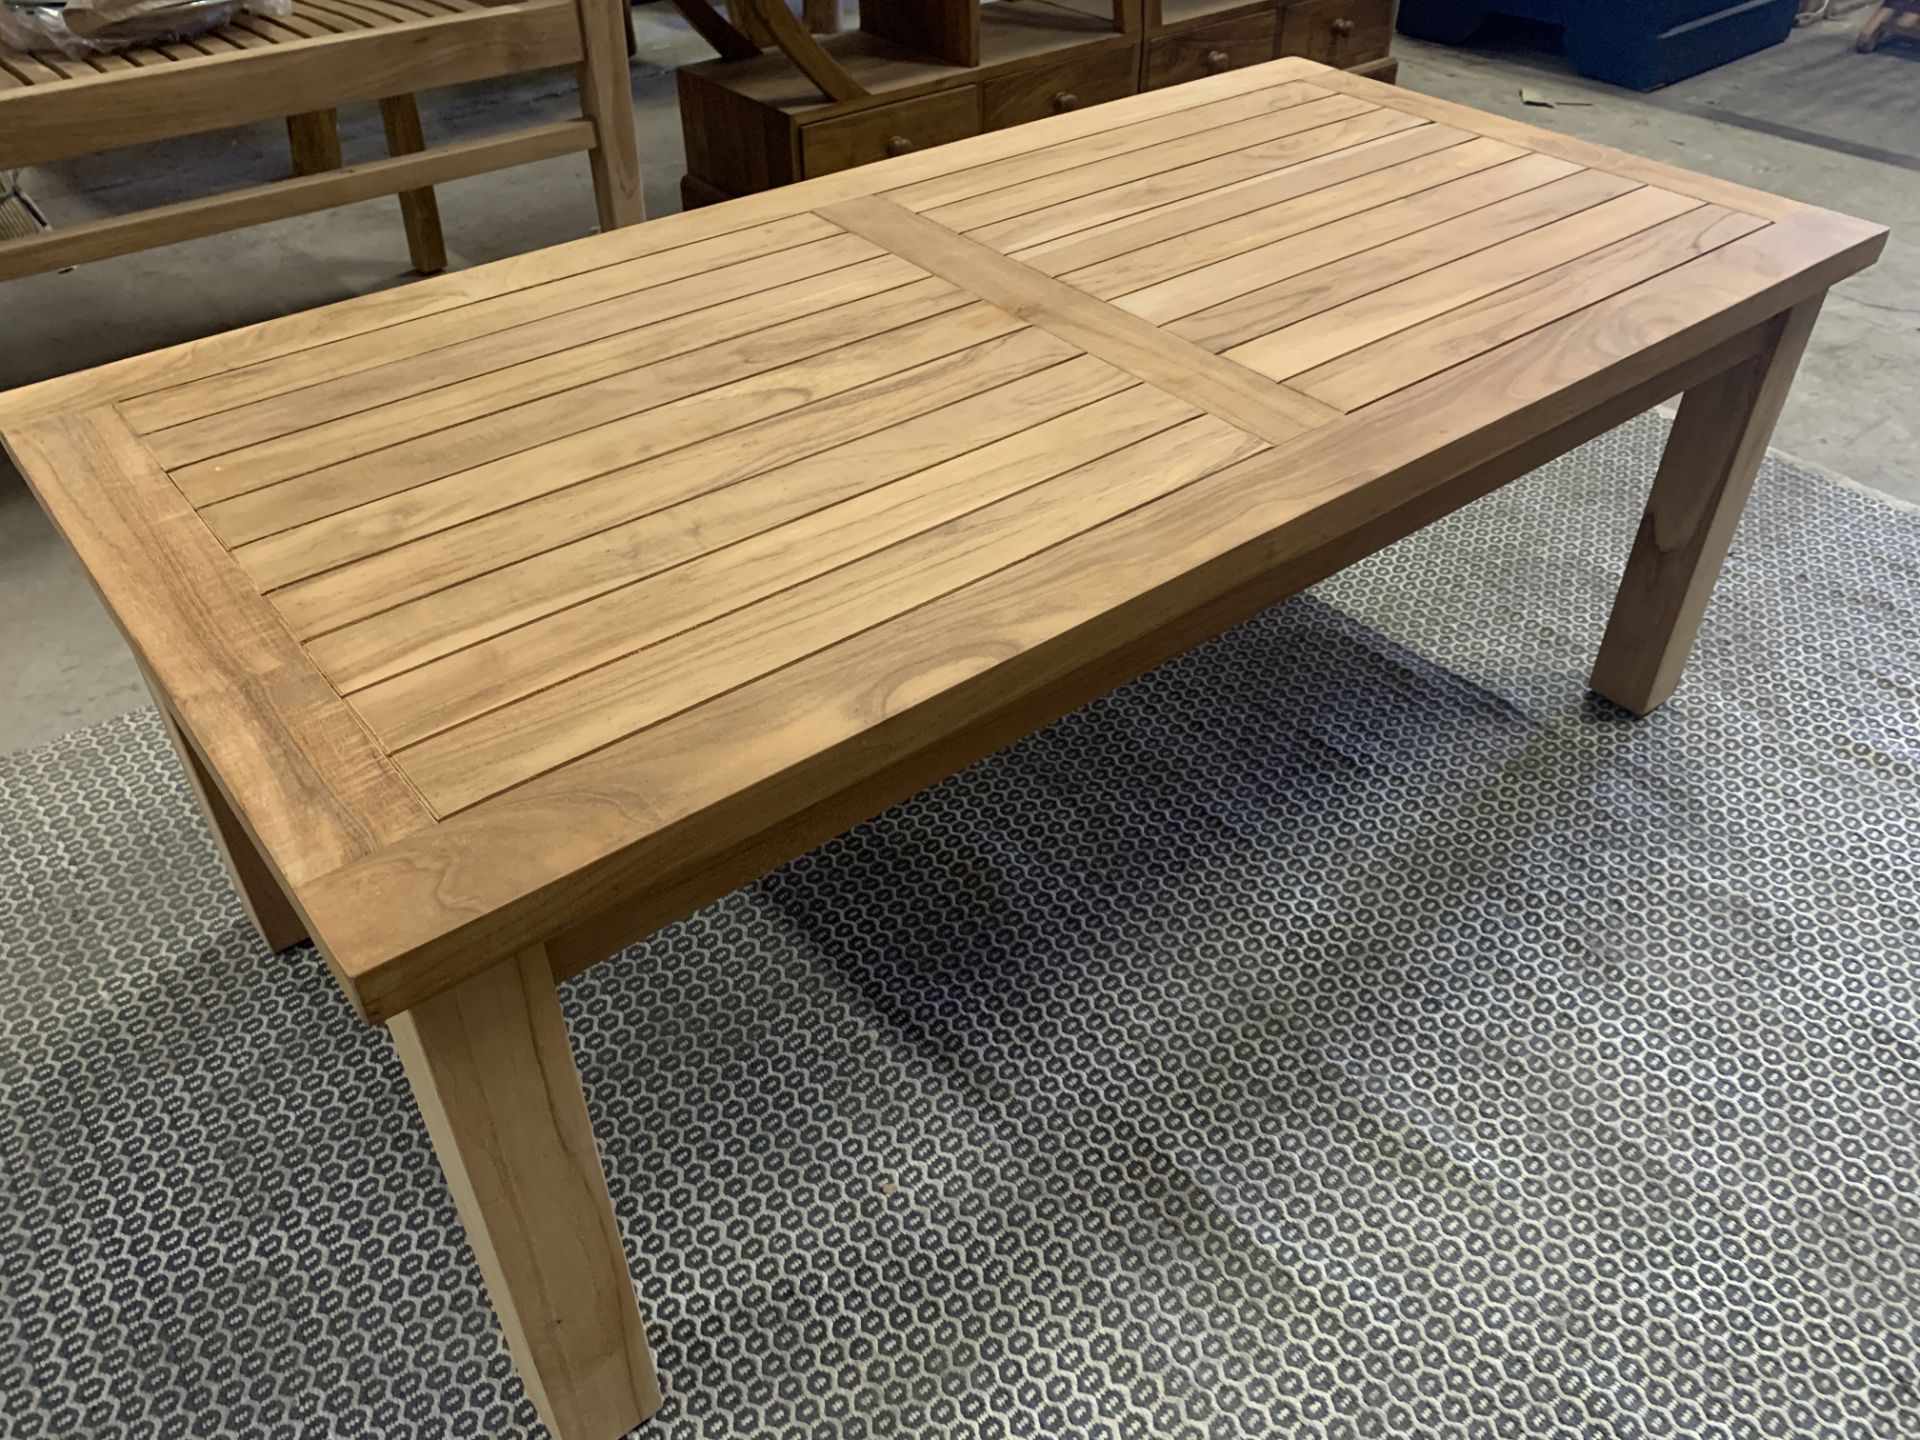 SOLID WOODEN TEAK RECTA COFFEE TABLE L120 X W60 X H45 RRP £295